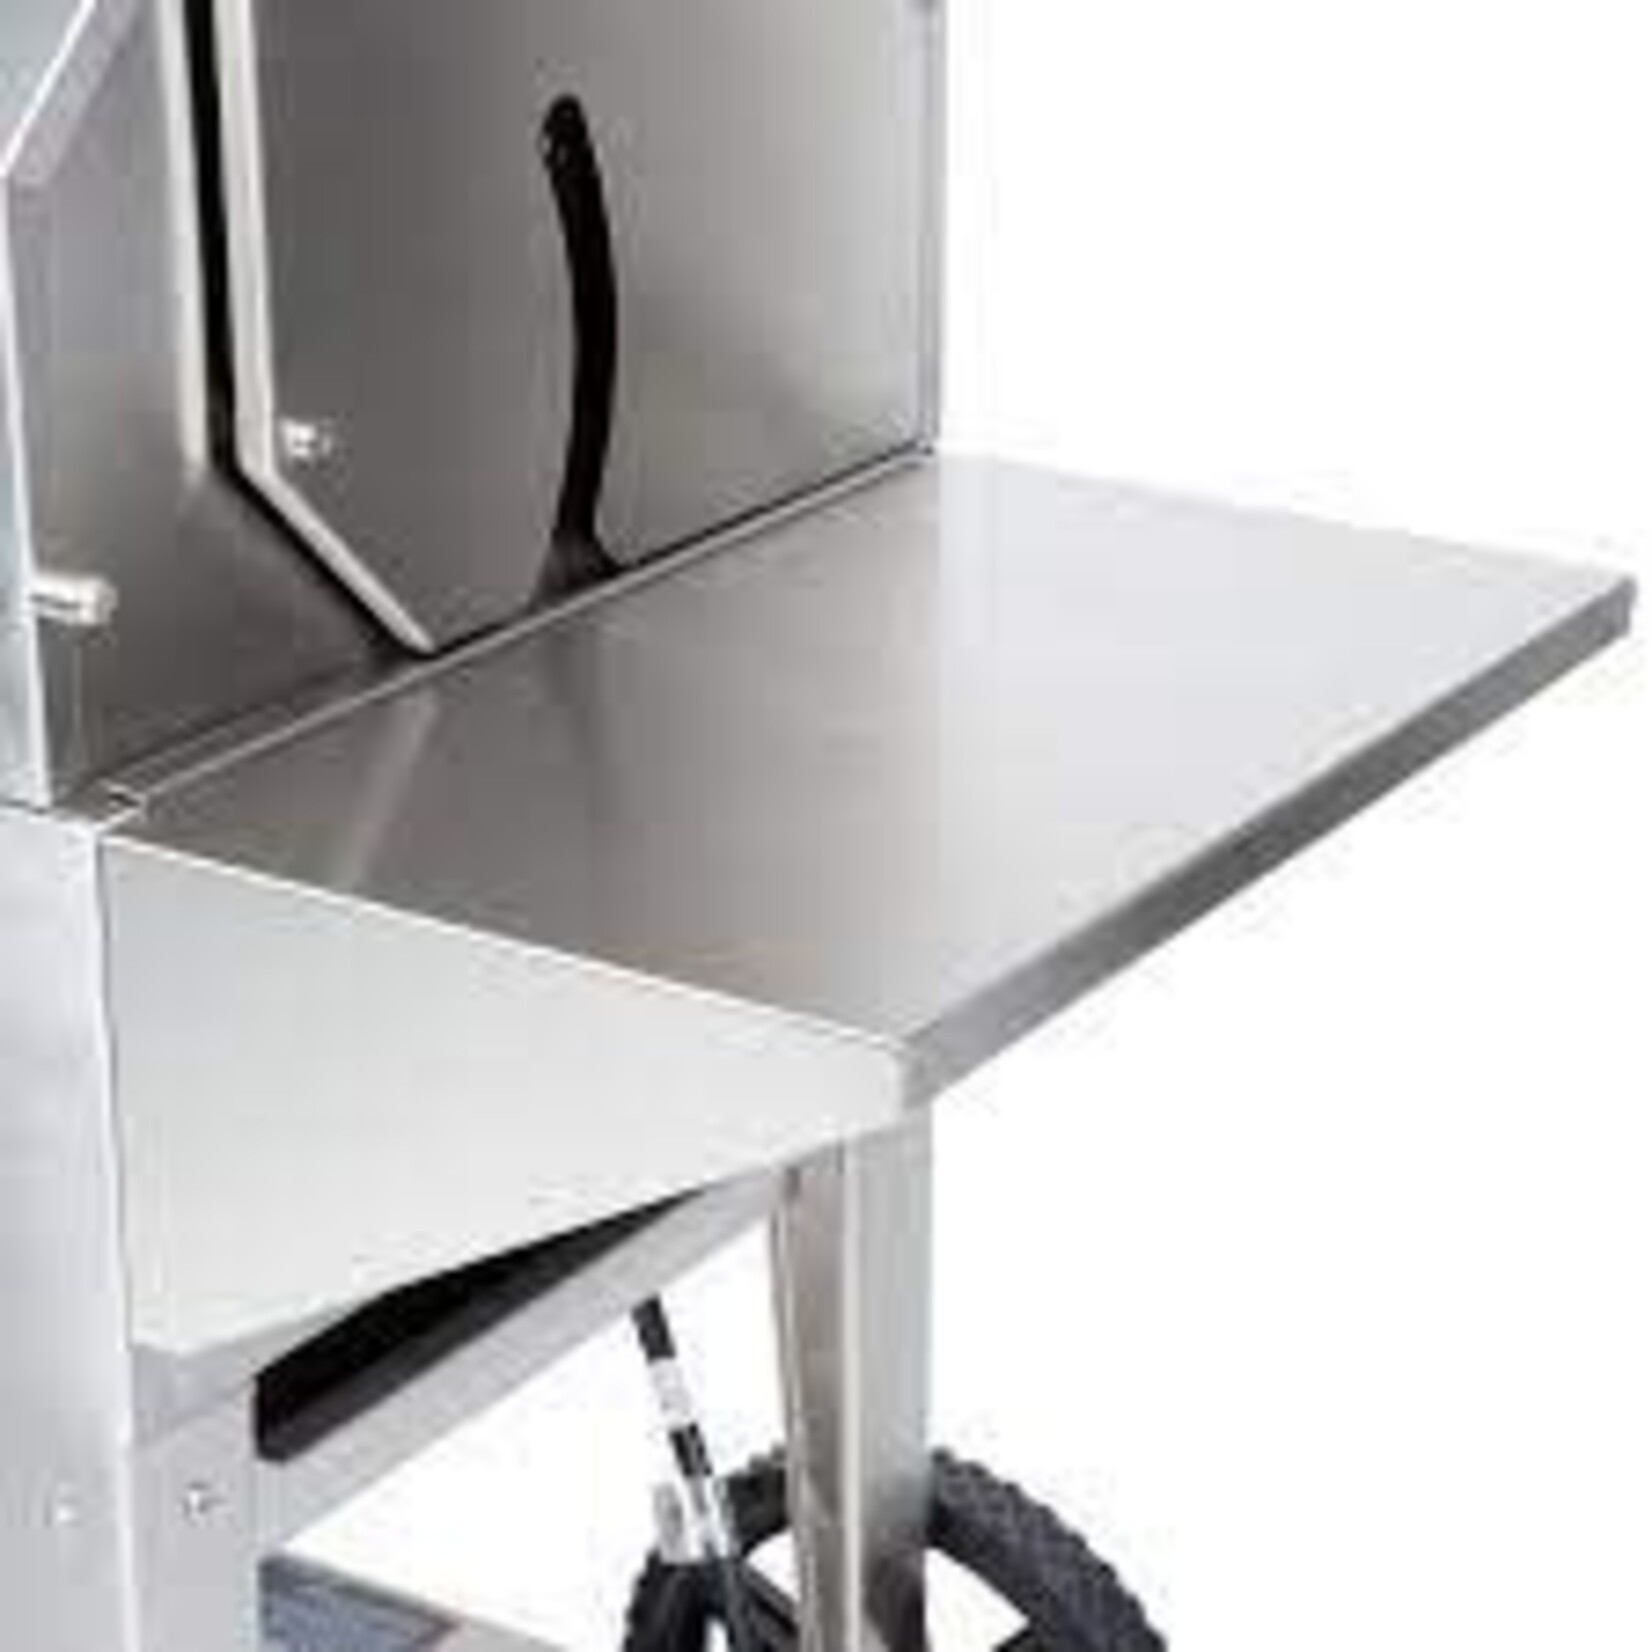 Crown Verity Crown Verity Removable Aluiminum End Shelf - with hardware